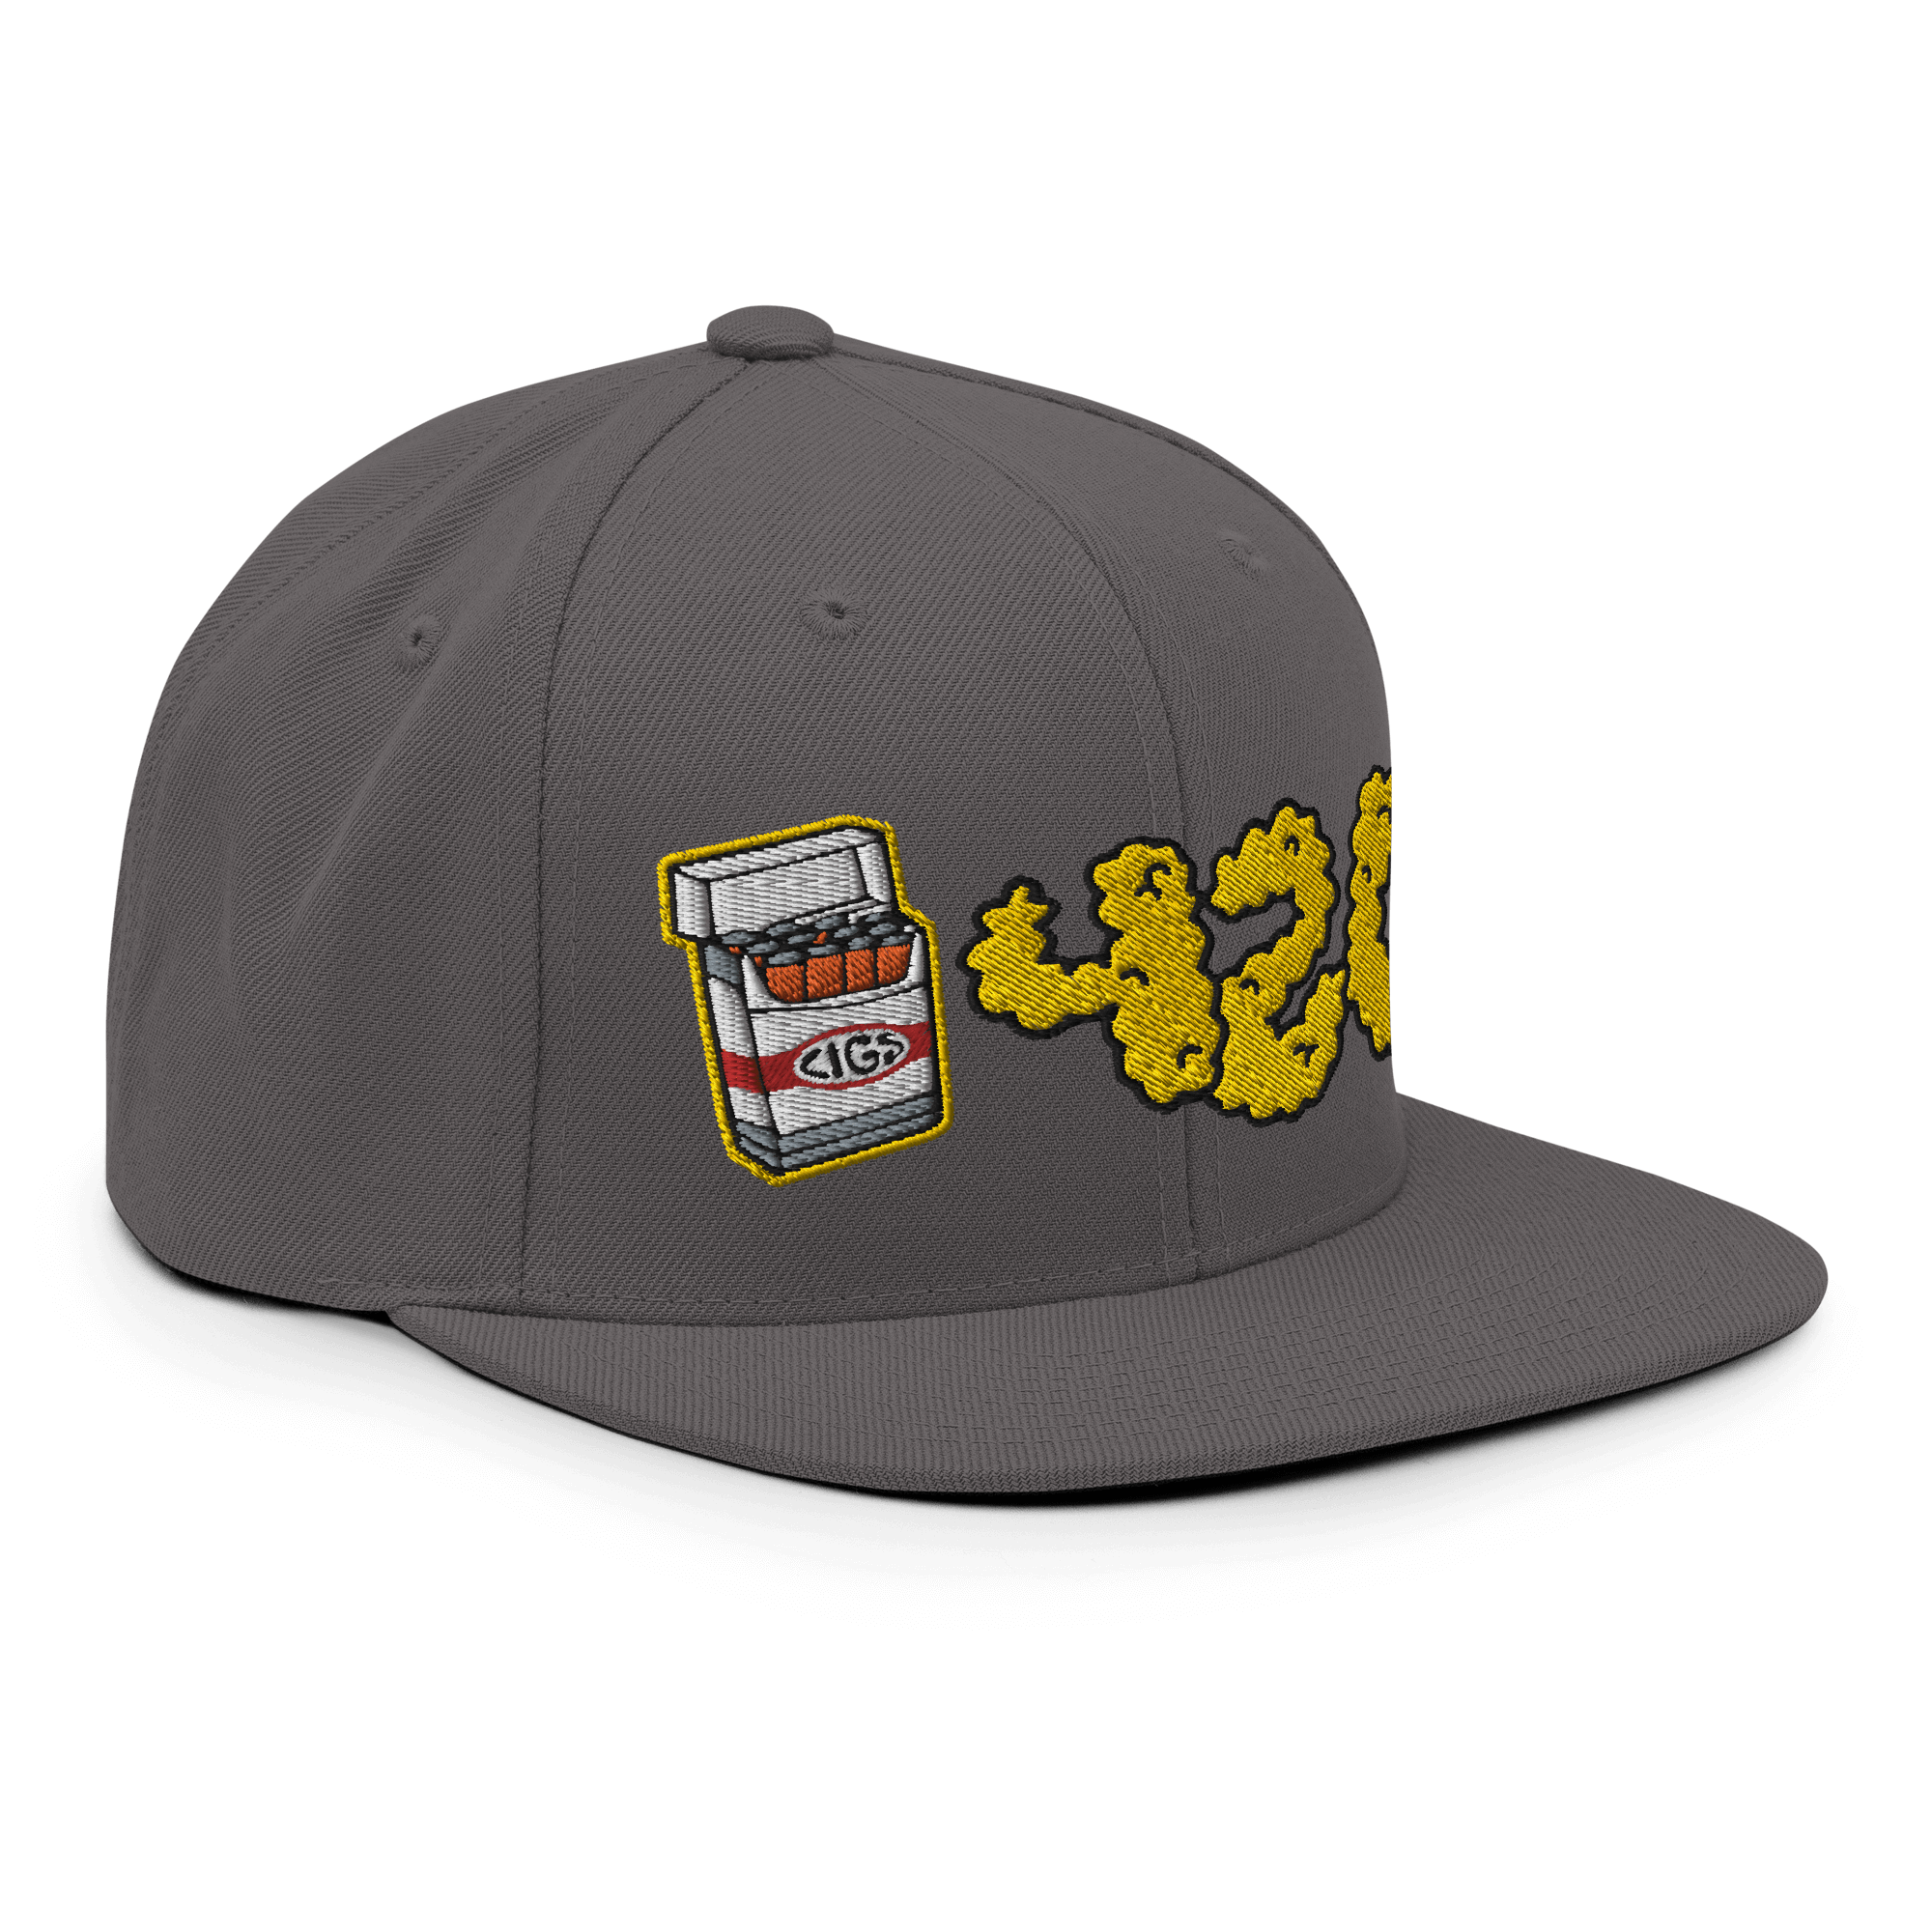 Smog 420 Snapback CapDive into urban chic with the Smog 420 Snapback Cap – a classic fit, flat brim, and full buckram for a look that's both structured and laid-back. The adjustable snap closure ensures a comfortable, one-size-fits-most style. Crafted exc